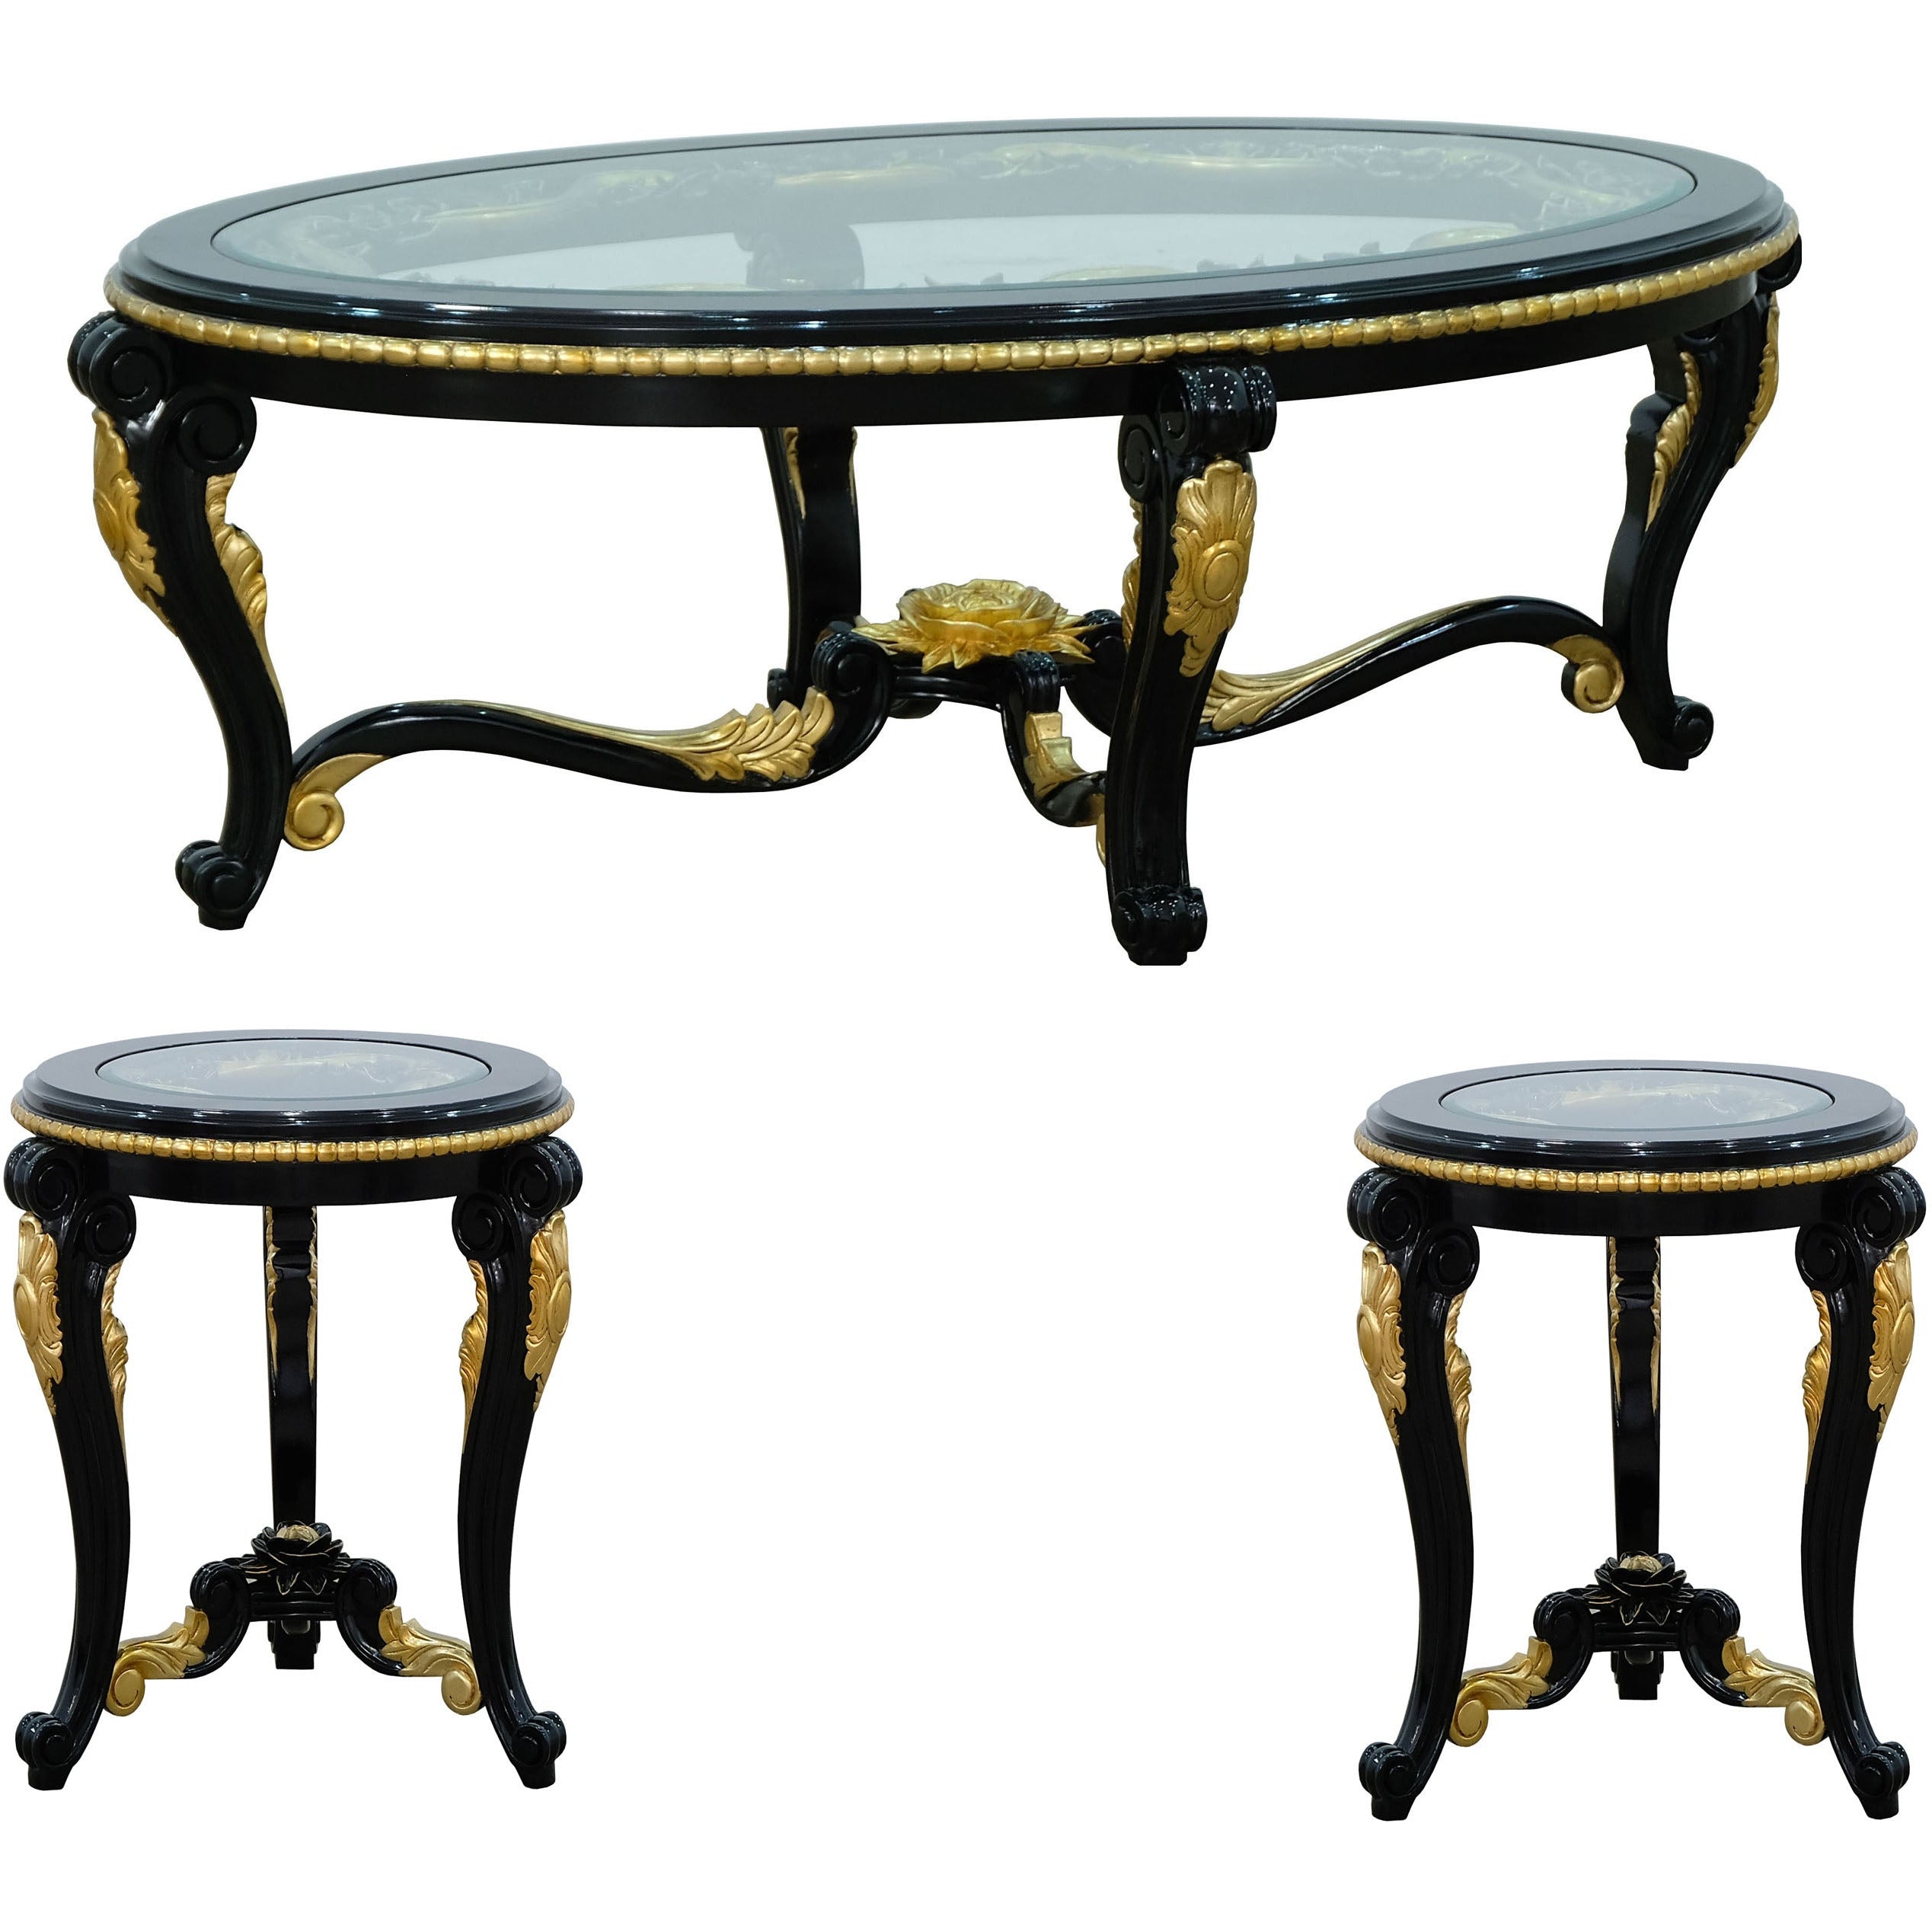 European Furniture - Bellagio III 3 Piece Occasional Table Set in Black-Gold- 30019-ET-CT - New Star Living